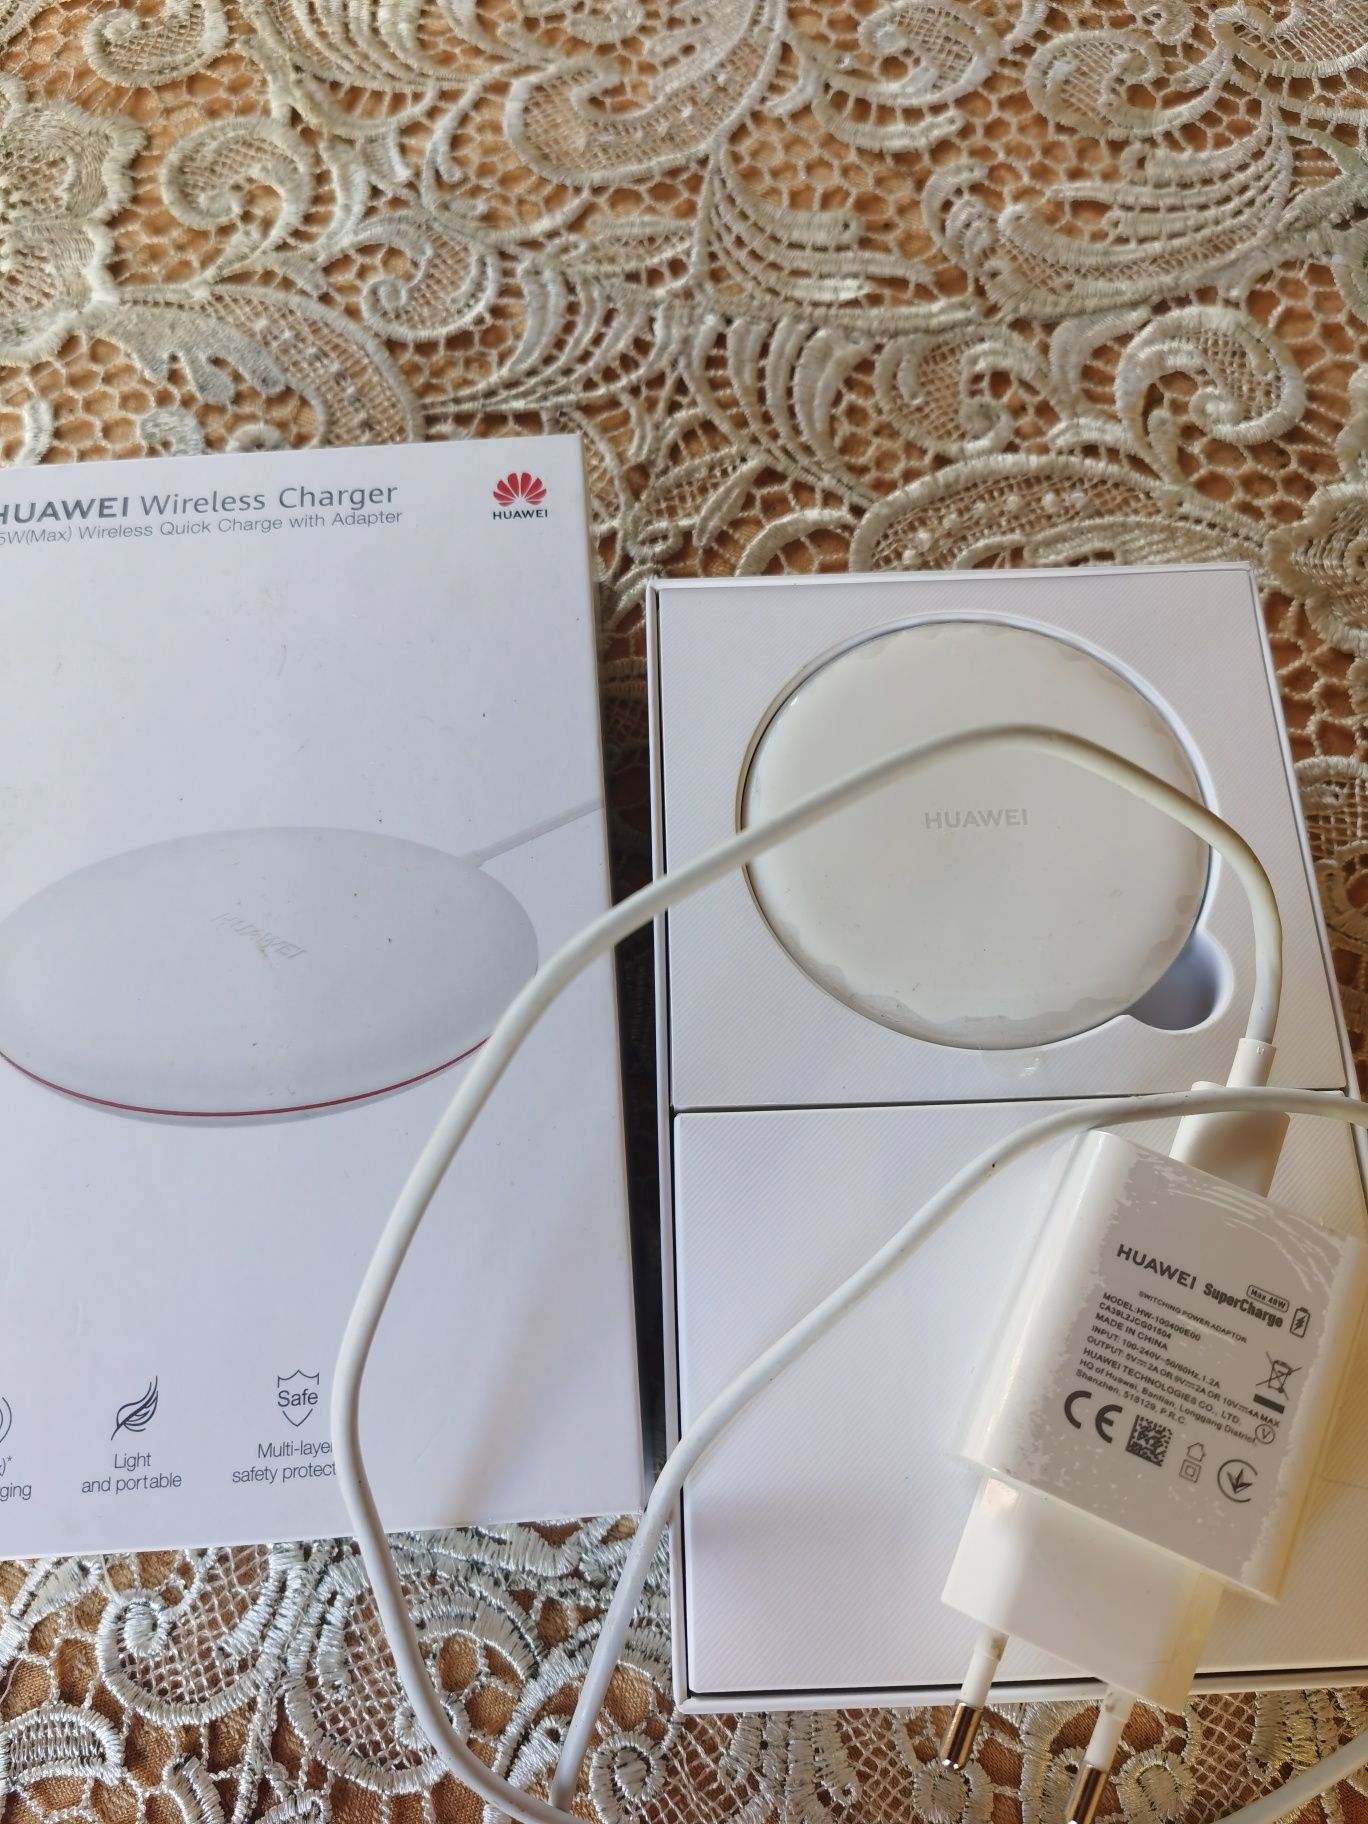 Huawei wireless charger